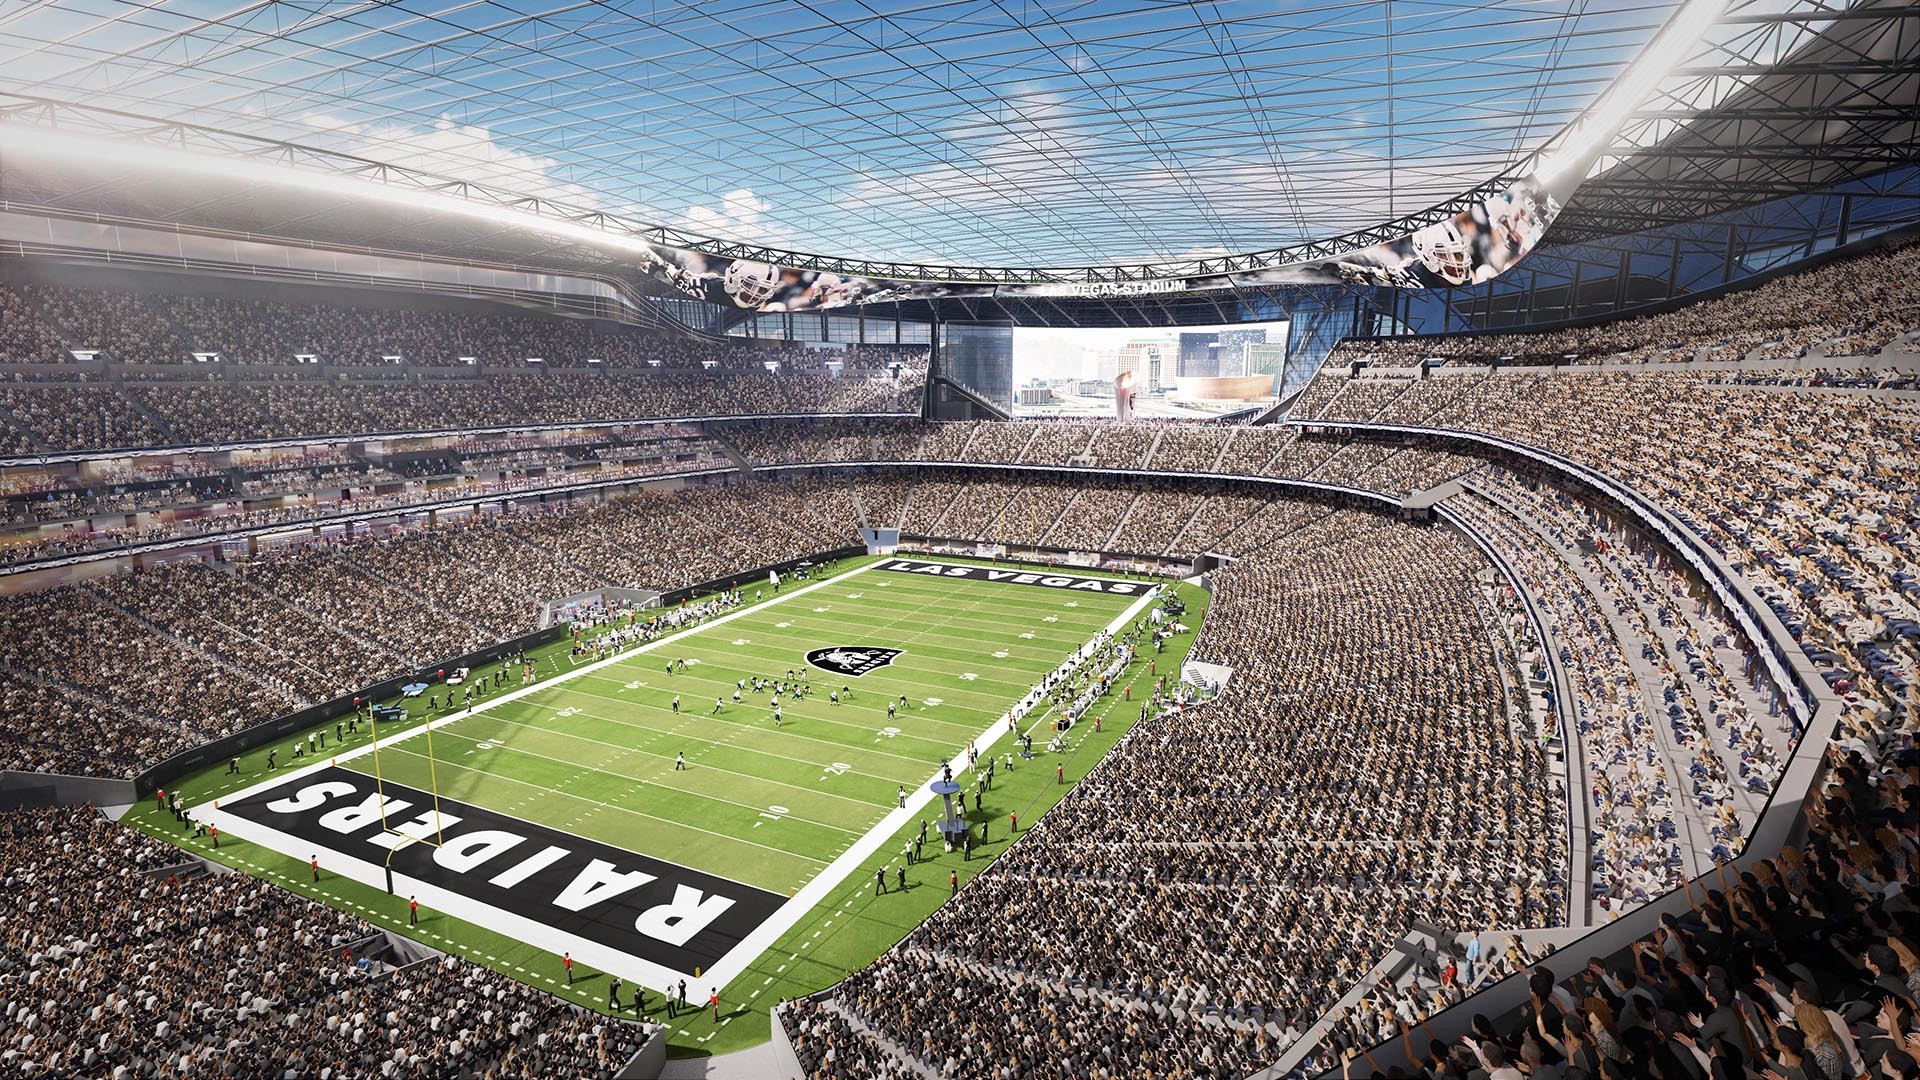 1920x1080 A rendering of the proposed Las Vegas Stadium for the Raiders NFL team.